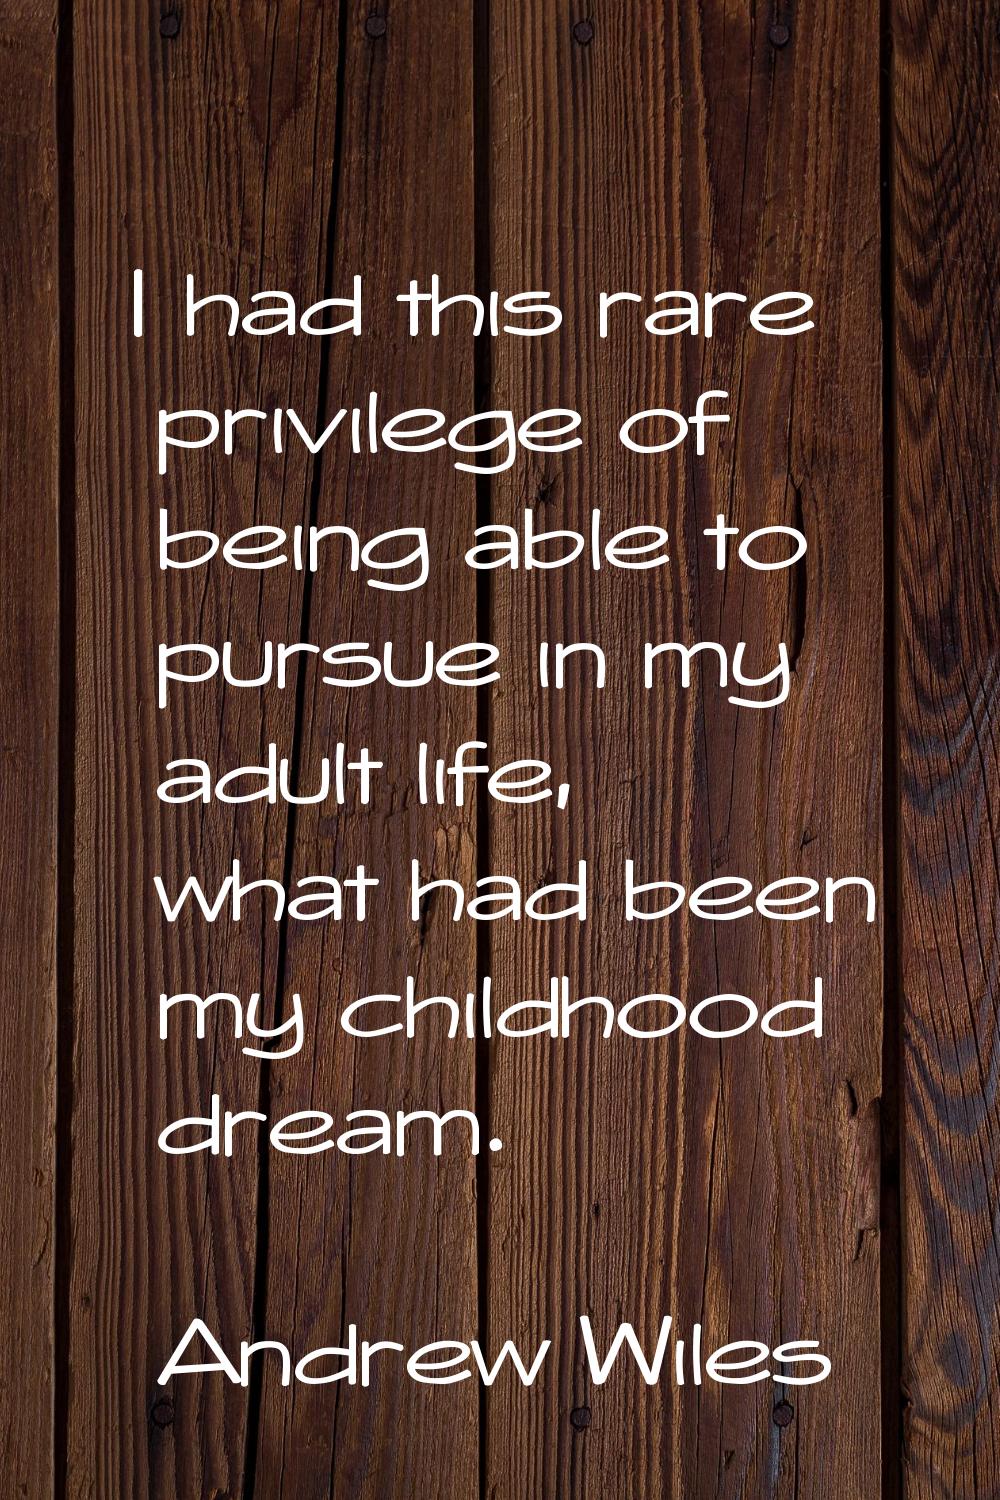 I had this rare privilege of being able to pursue in my adult life, what had been my childhood drea